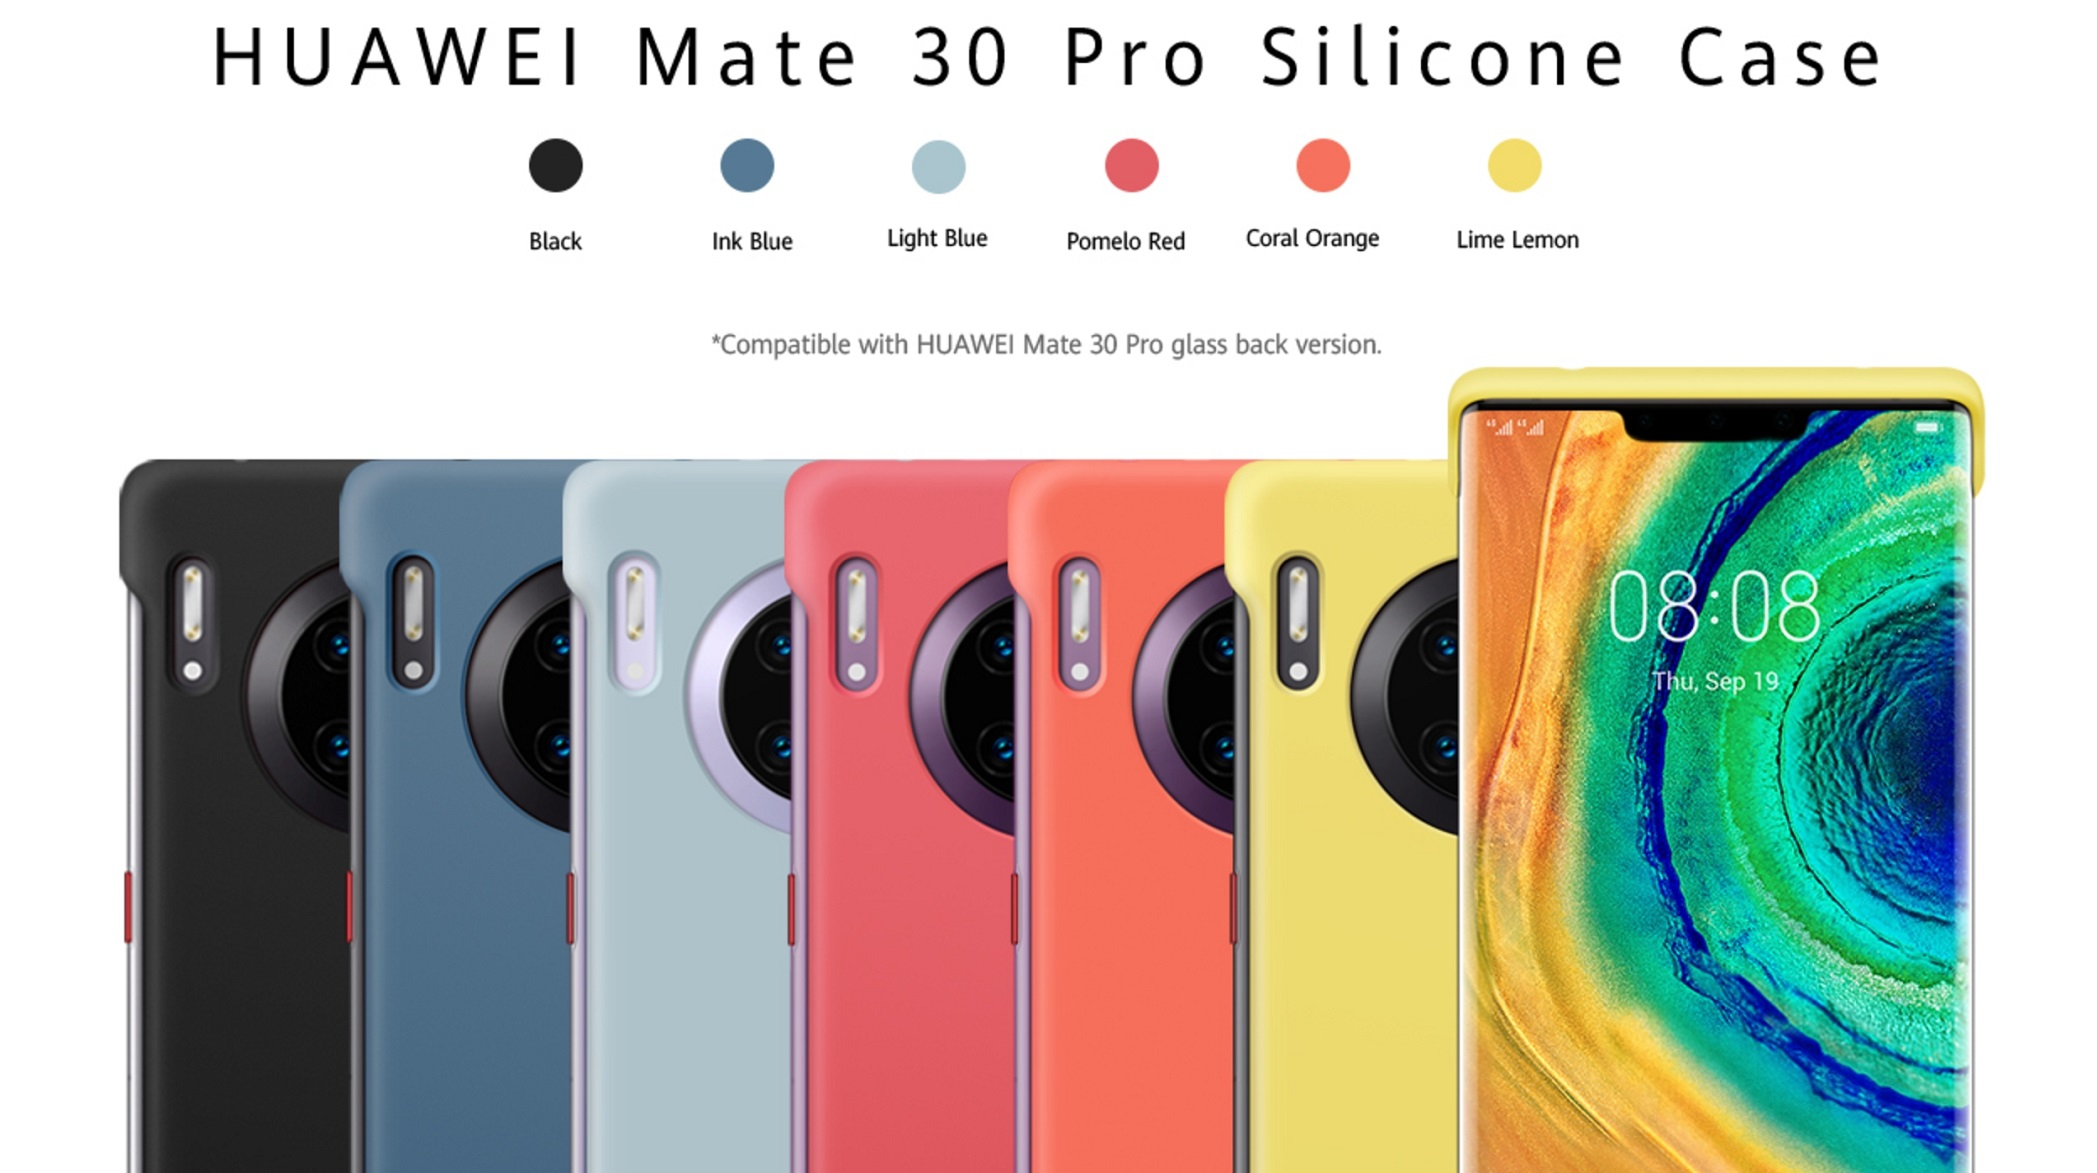  Huawei Mate 30 Pro Silicone Case 